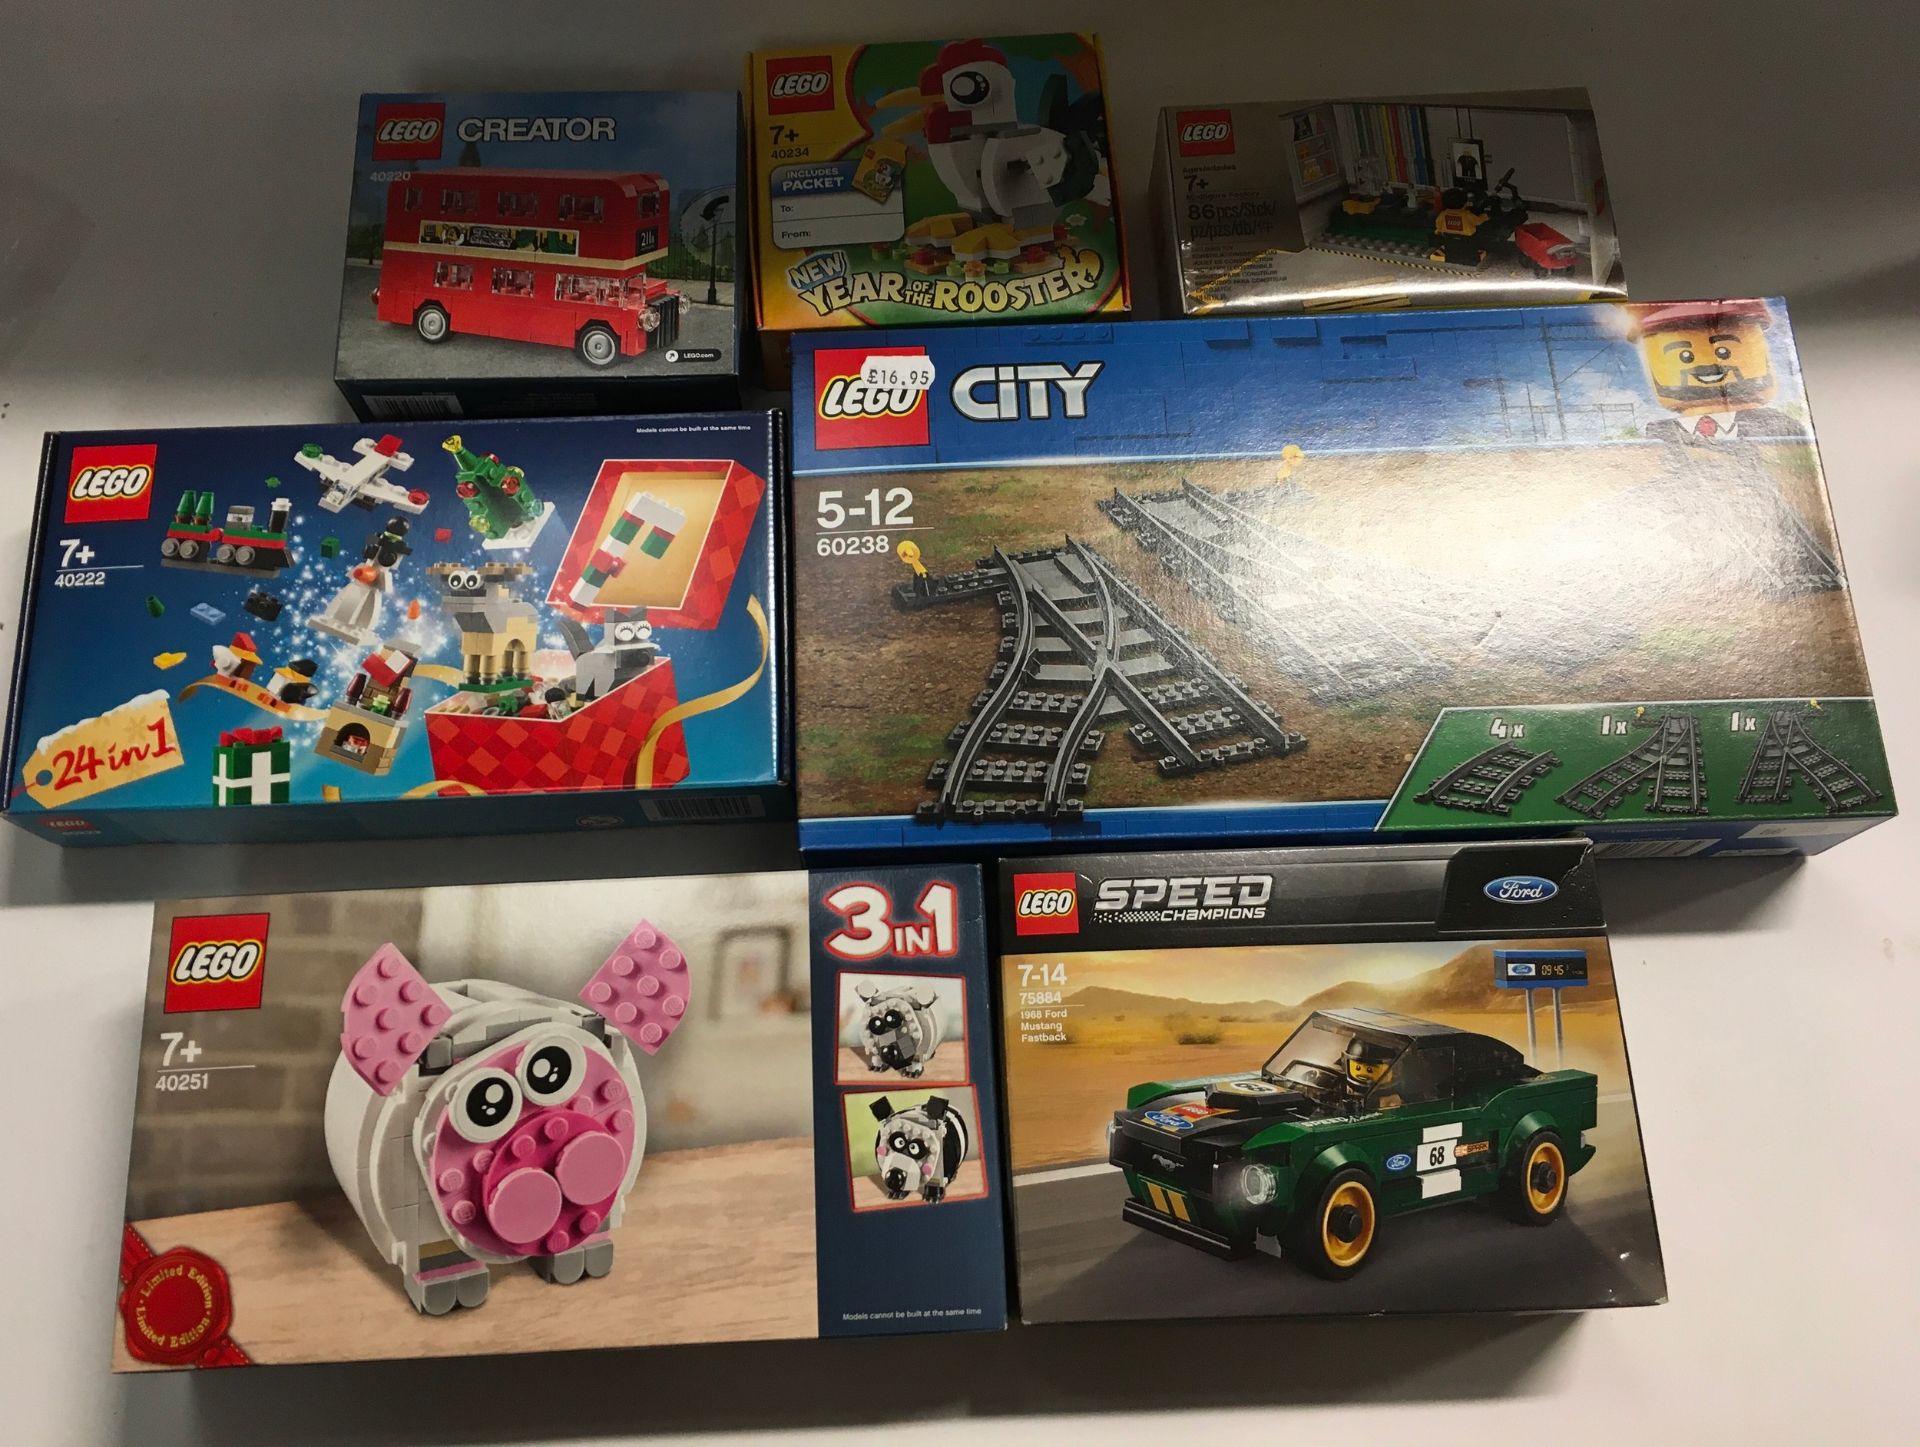 7 x Lego sets: 75884 1968 Ford Mustang Fastback, 40251 3 in 1 money bank, 40220 London Bus, 40234